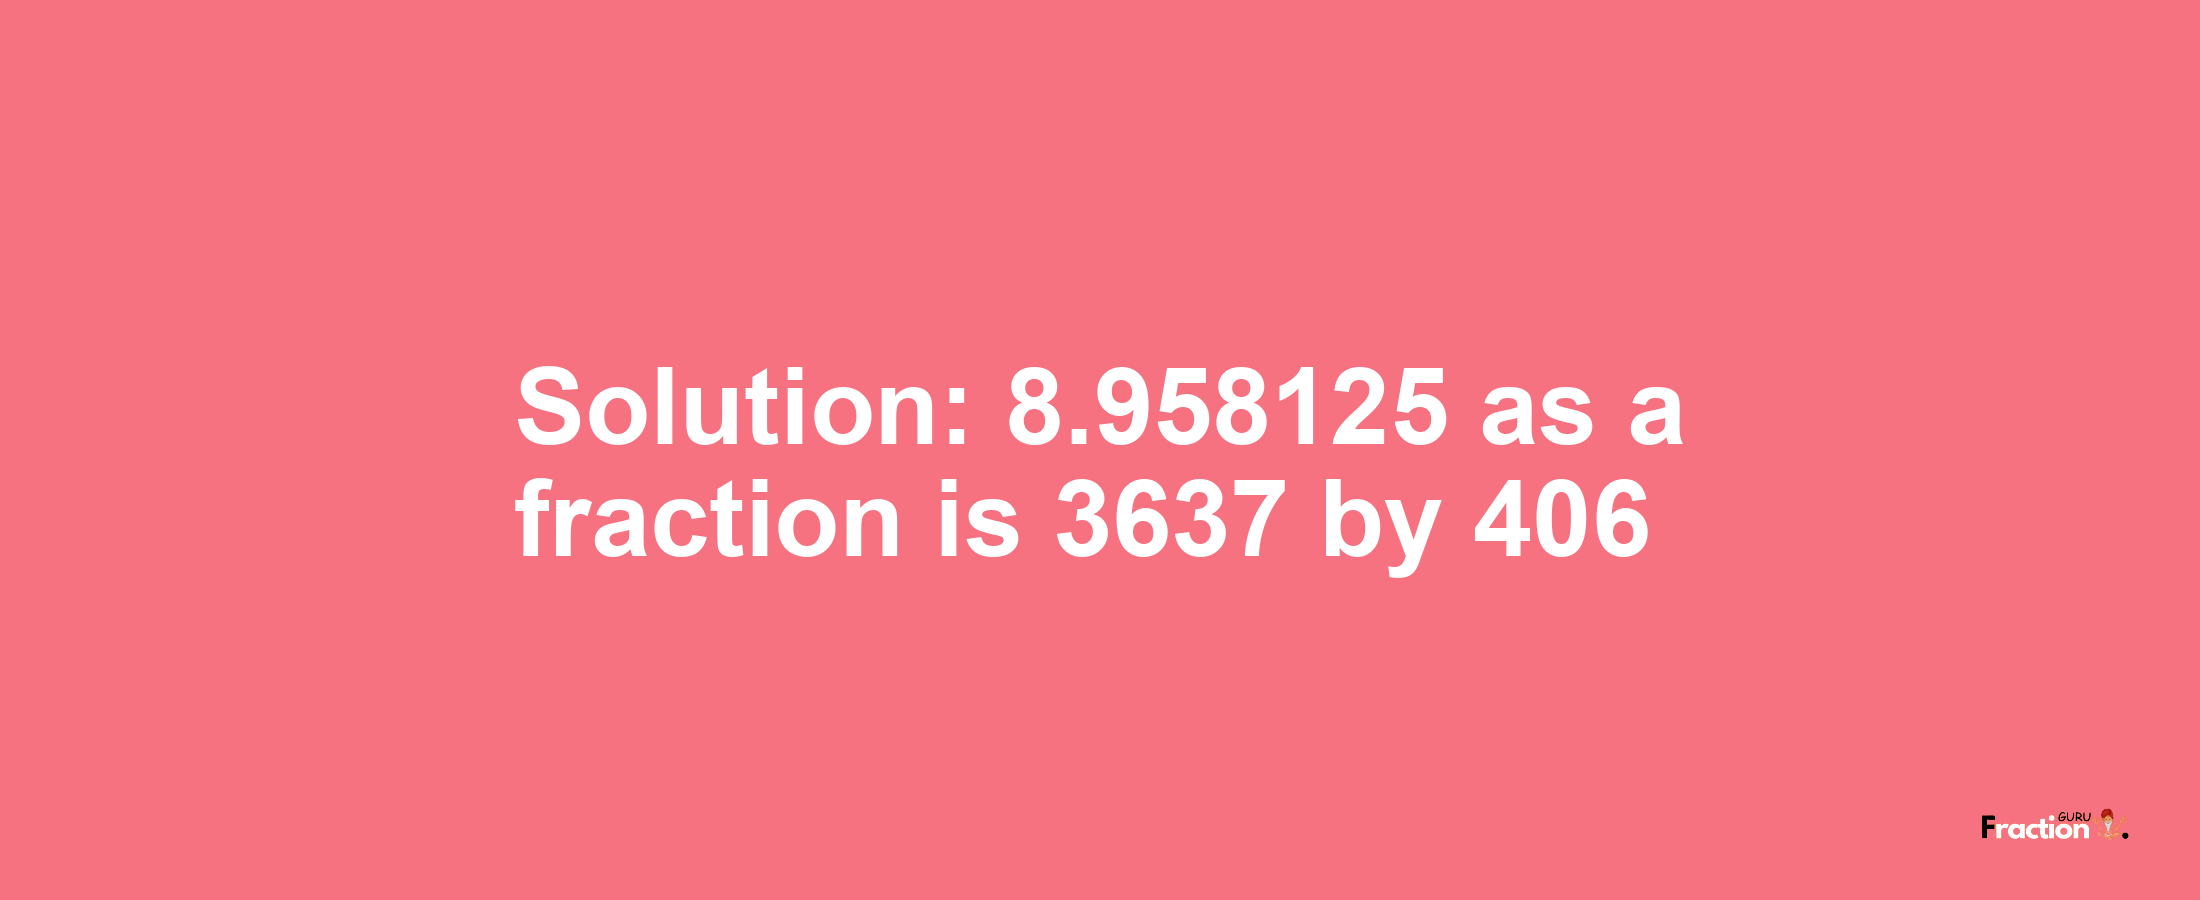 Solution:8.958125 as a fraction is 3637/406